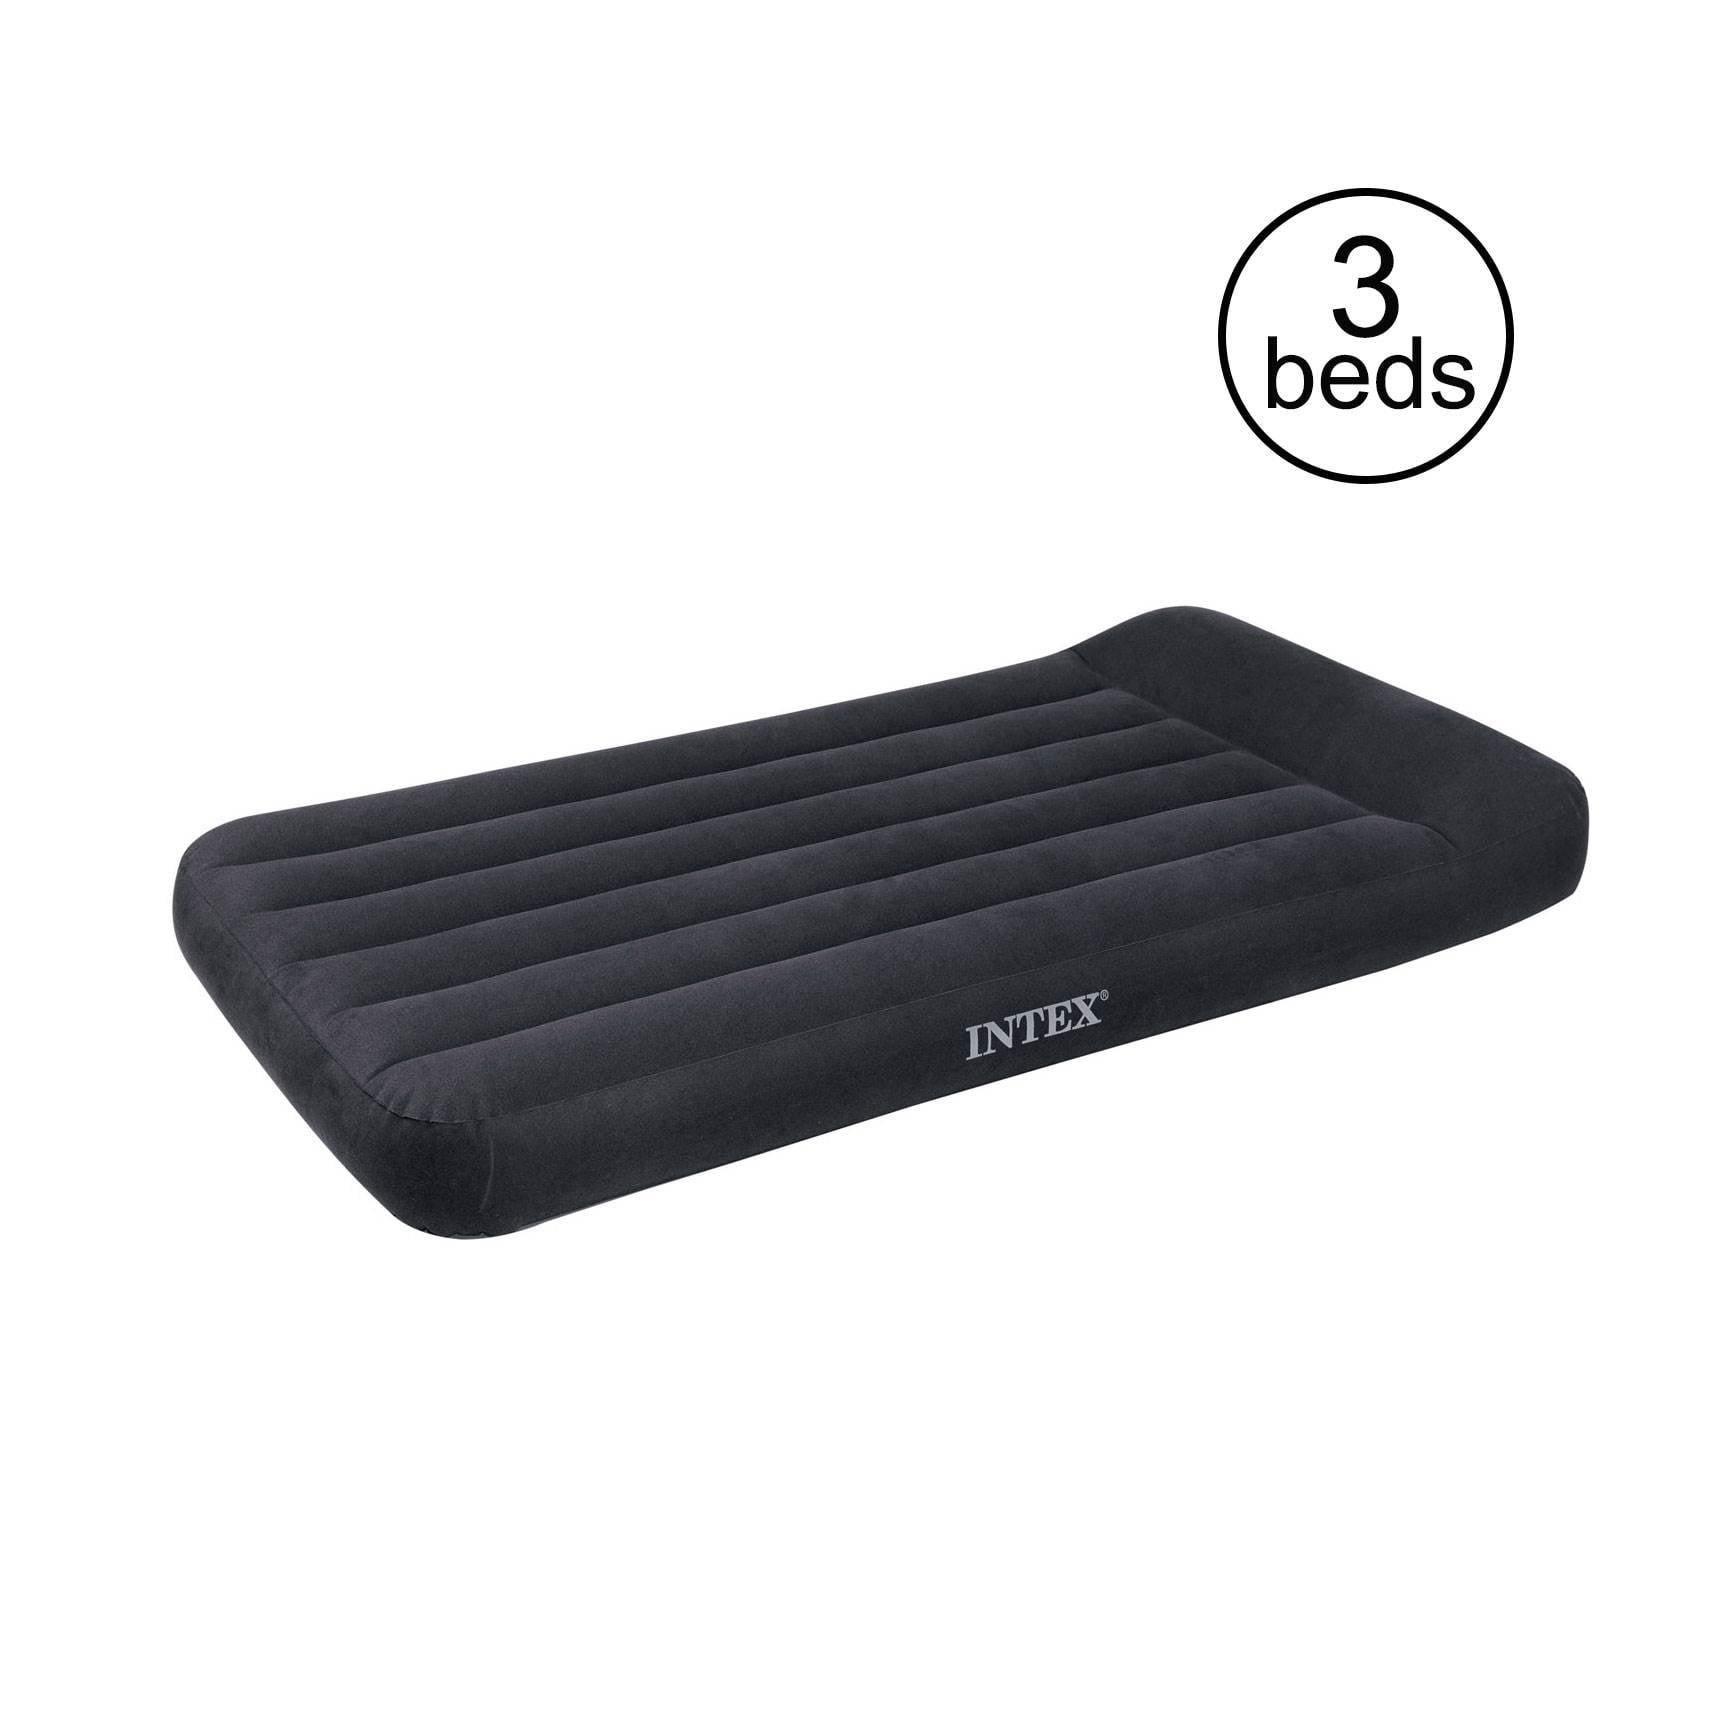 4 Pack Intex Twin Classic Pillow Rest Air Mattress Bed With Built In Pump